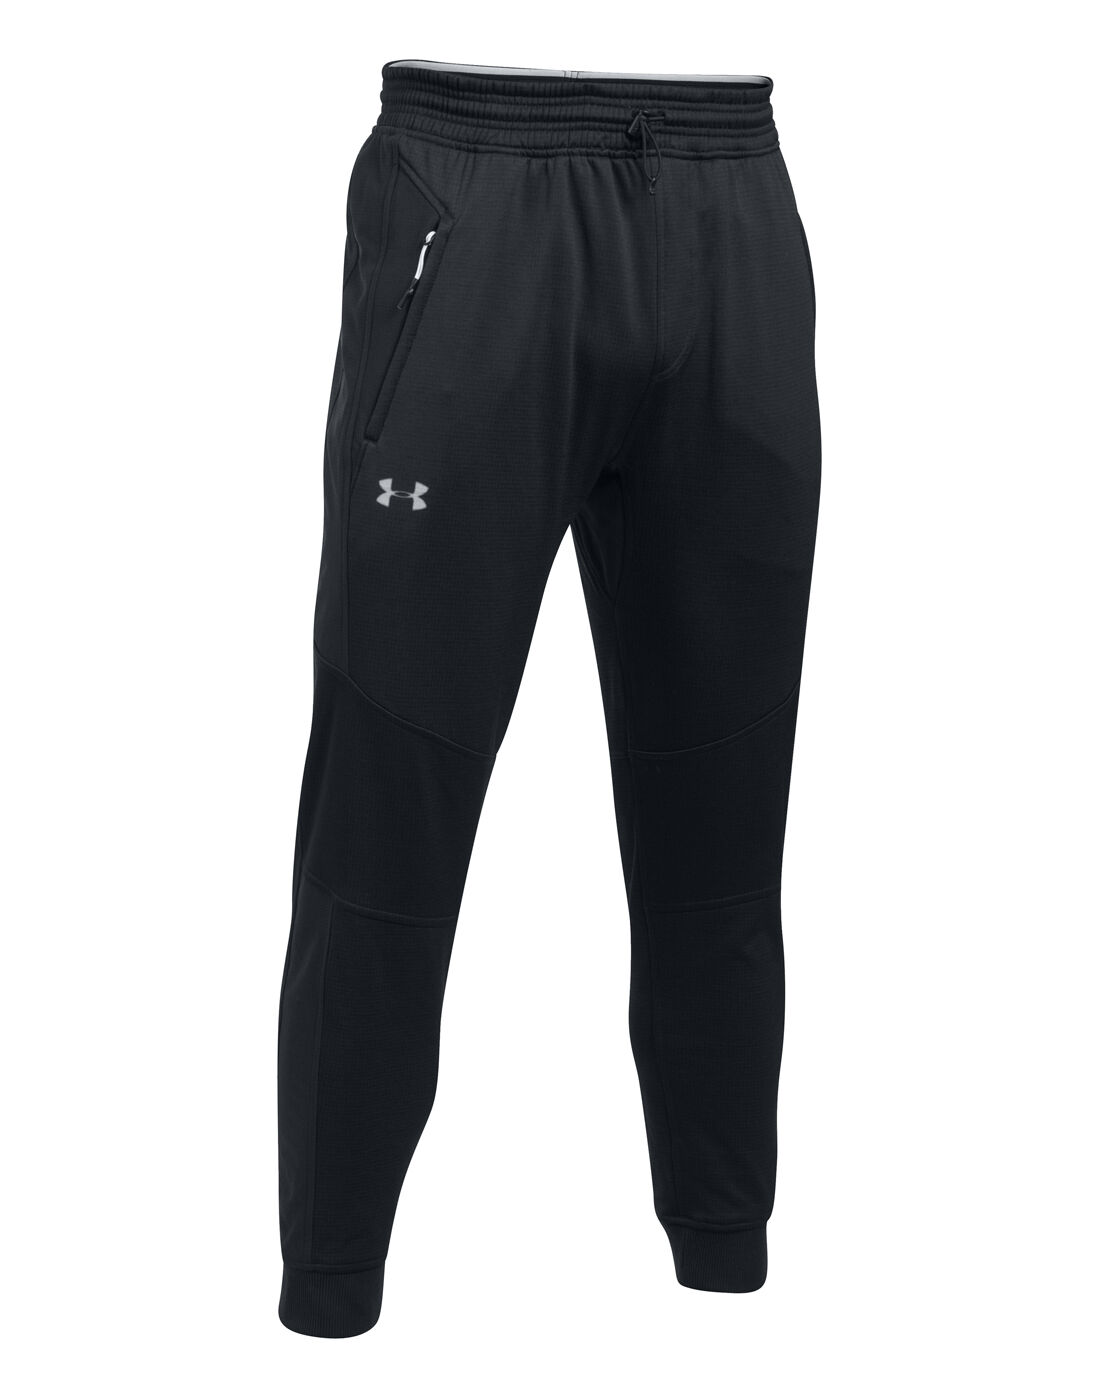 Under Armour Mens Reactor Tapered Pant 